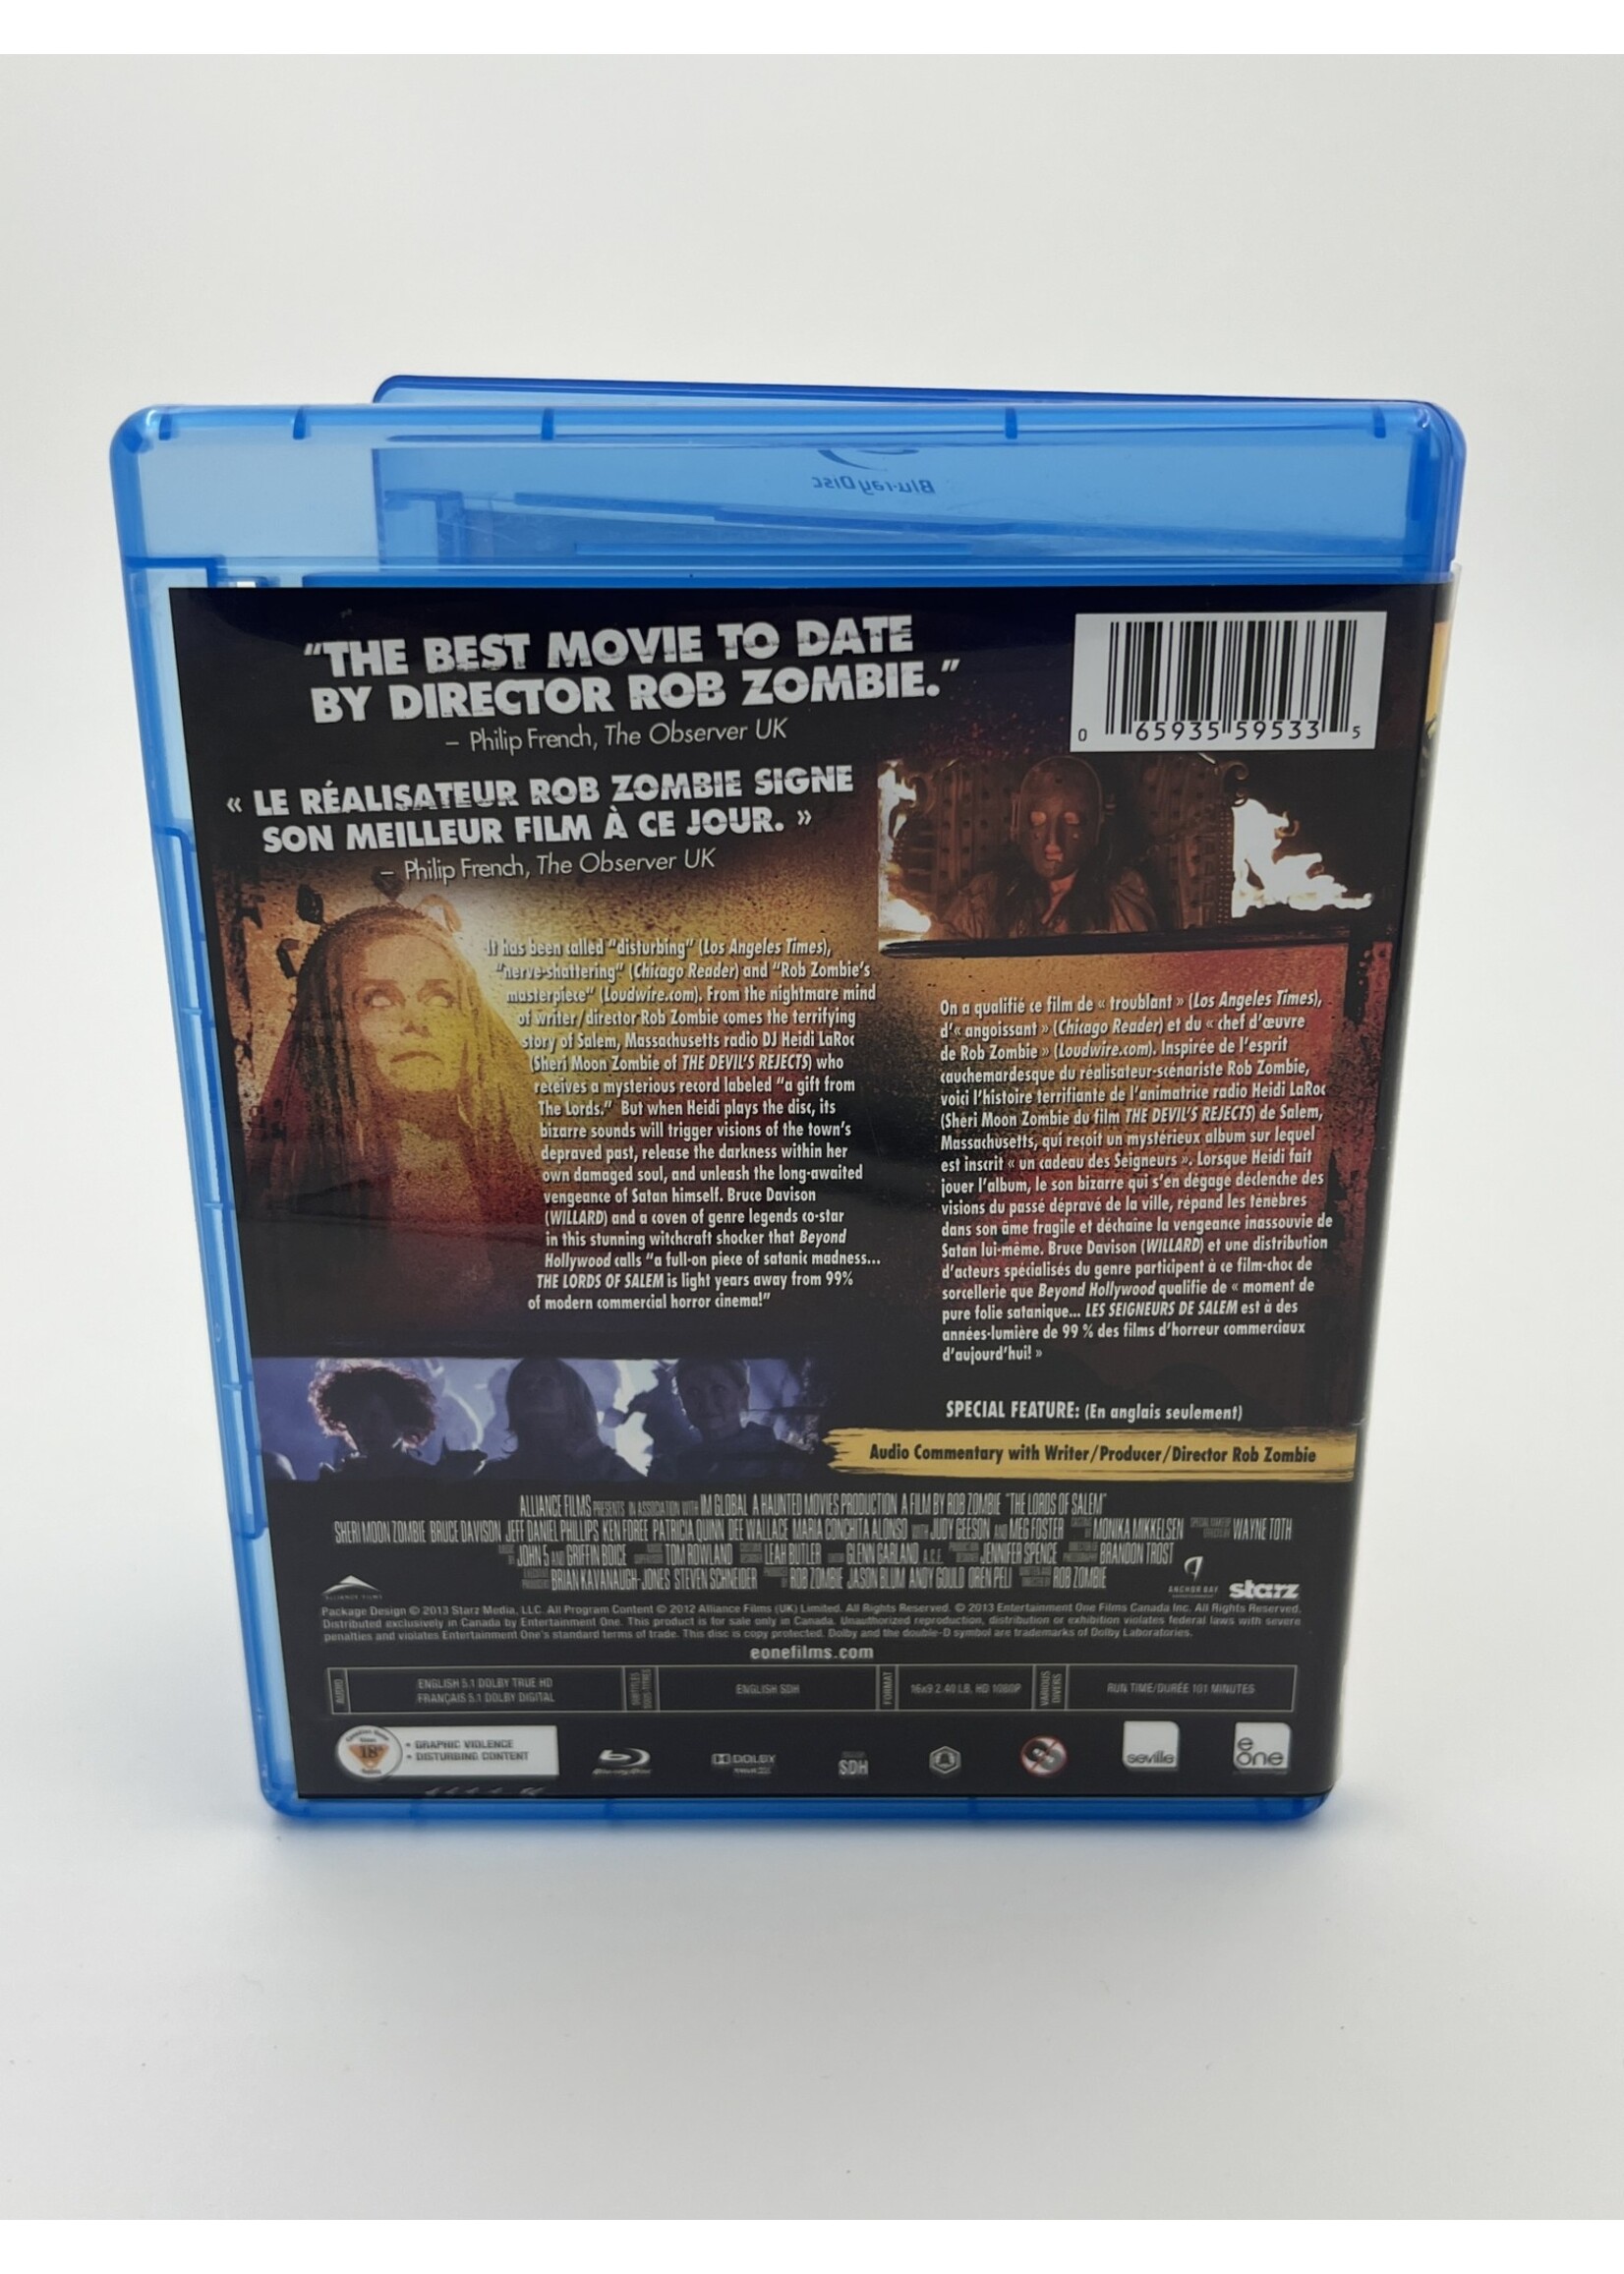 Bluray   The Lords Of Salem Bluray